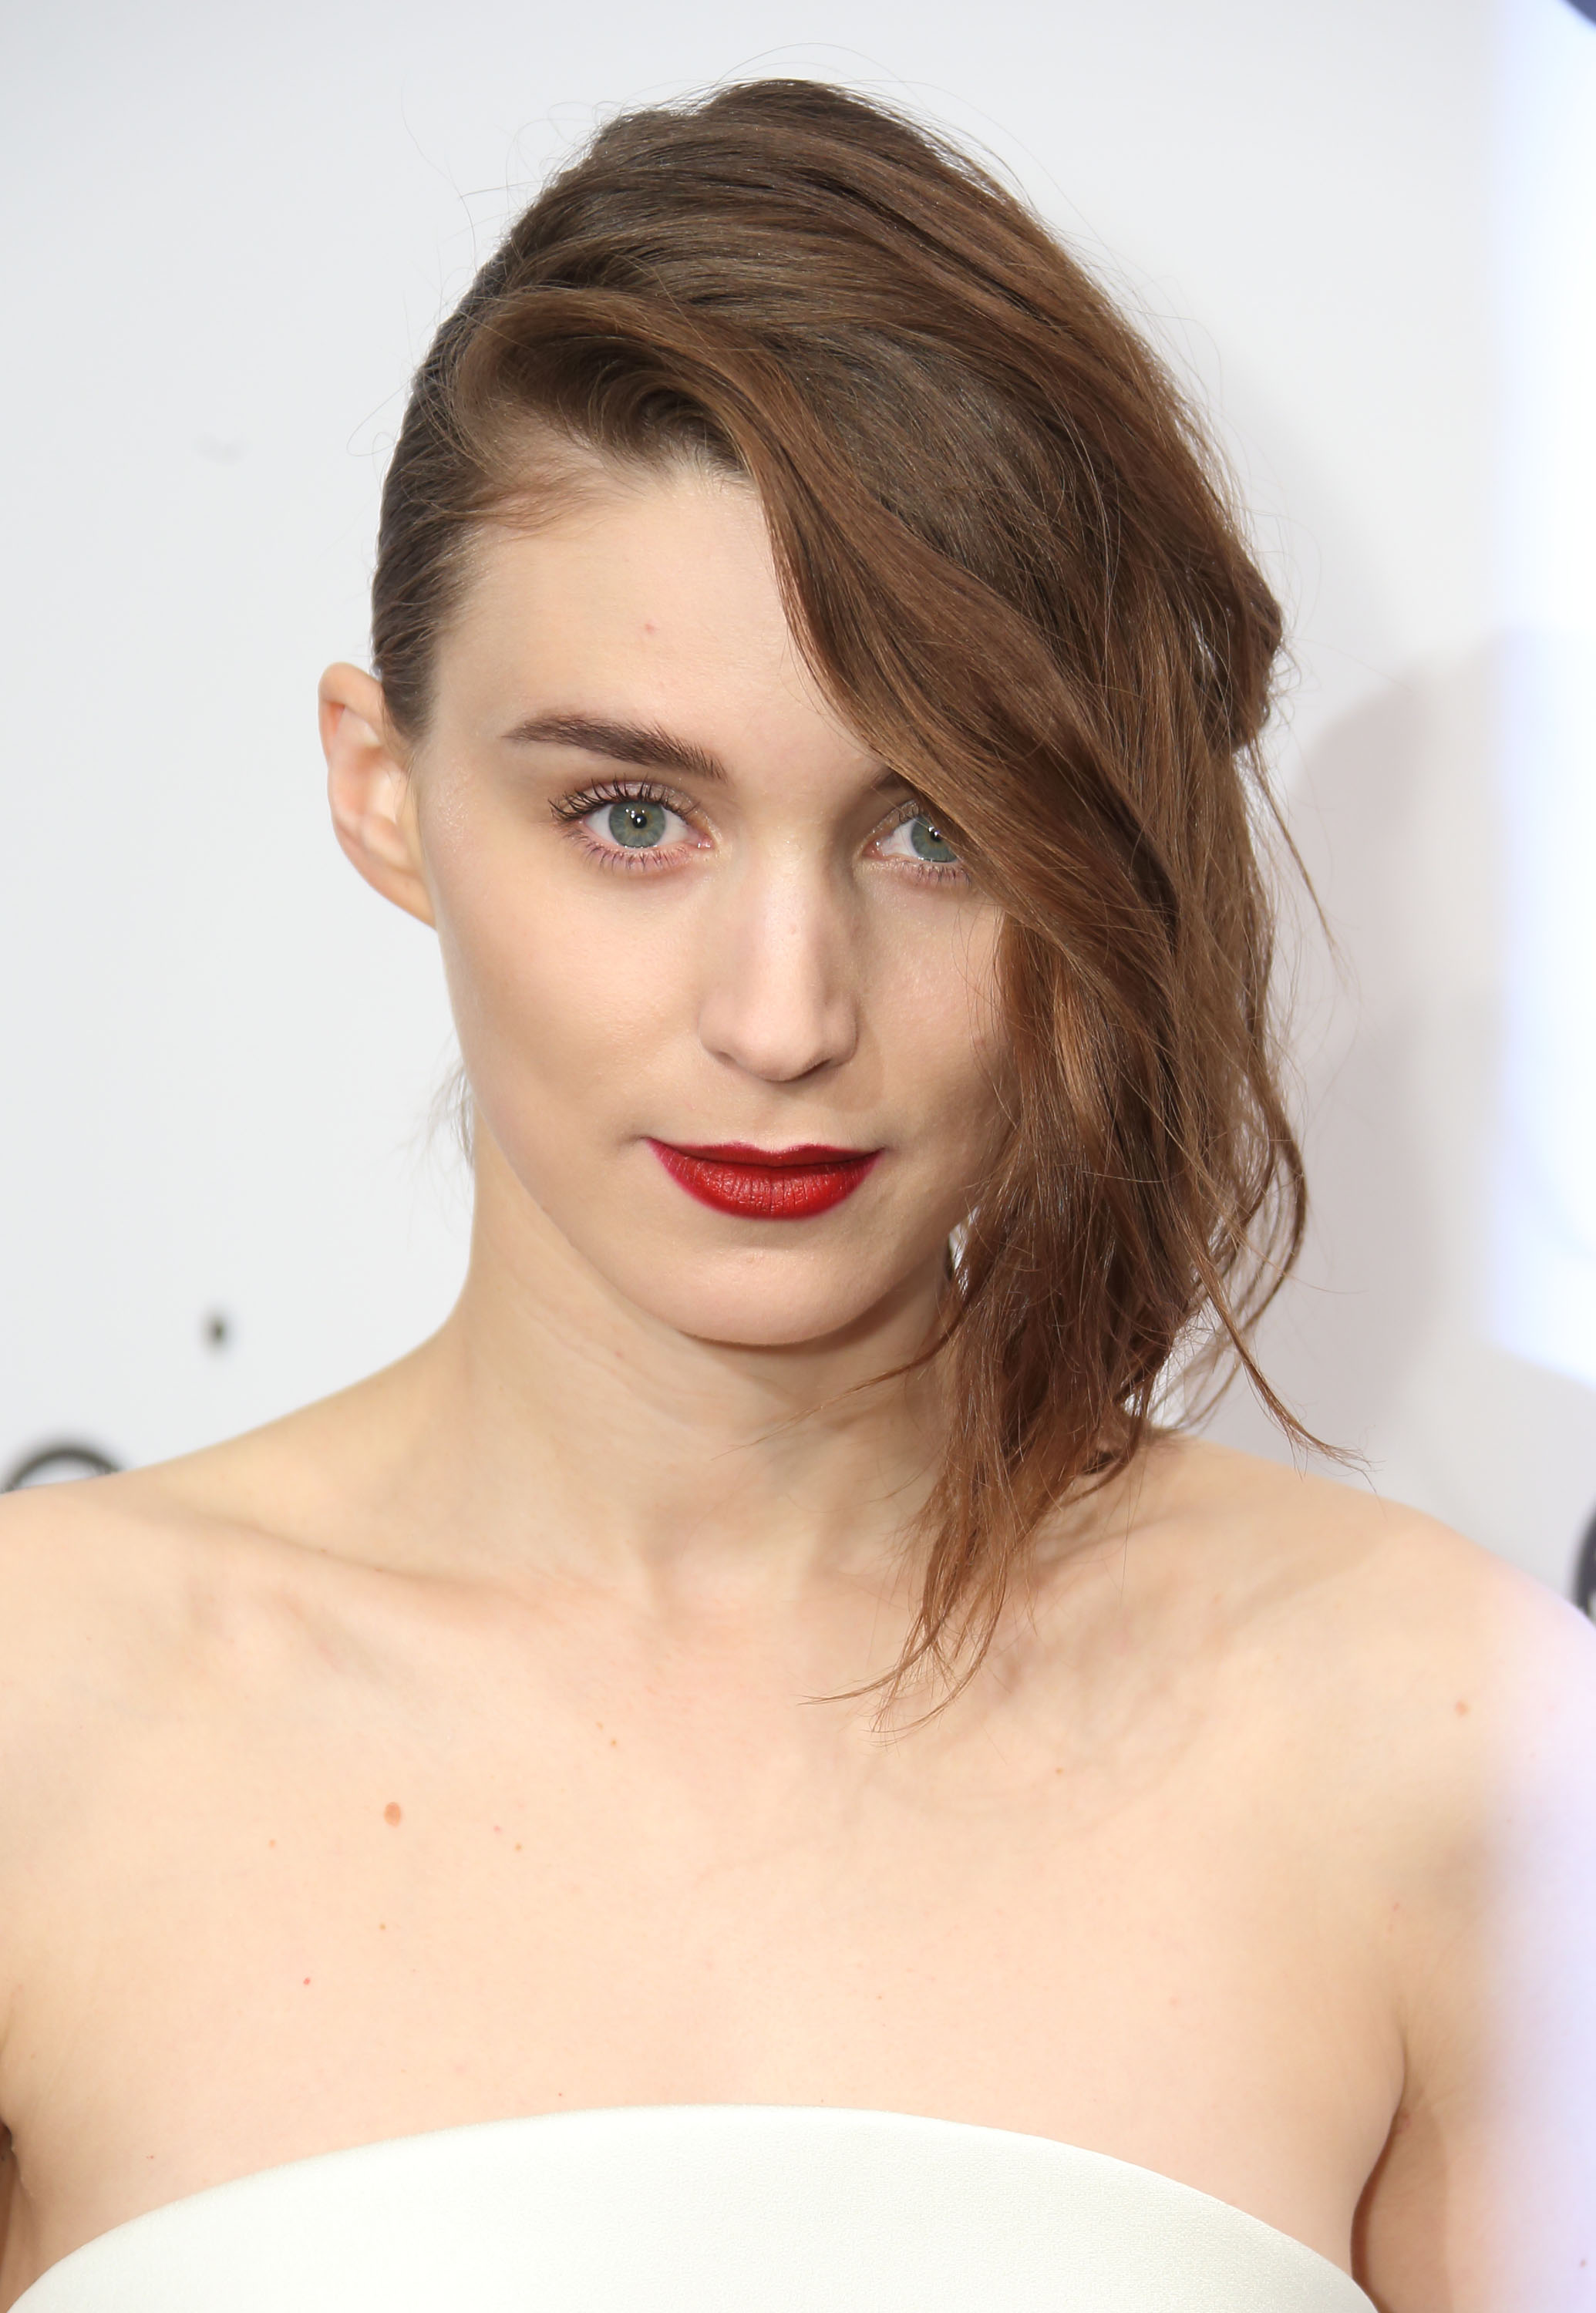 Rooney Mara attends the Calvin Klein Party at the 67th Annual Cannes Film Festival on May 15, 2014 in Cannes, France. (Mike Marsland&mdash;WireImage)